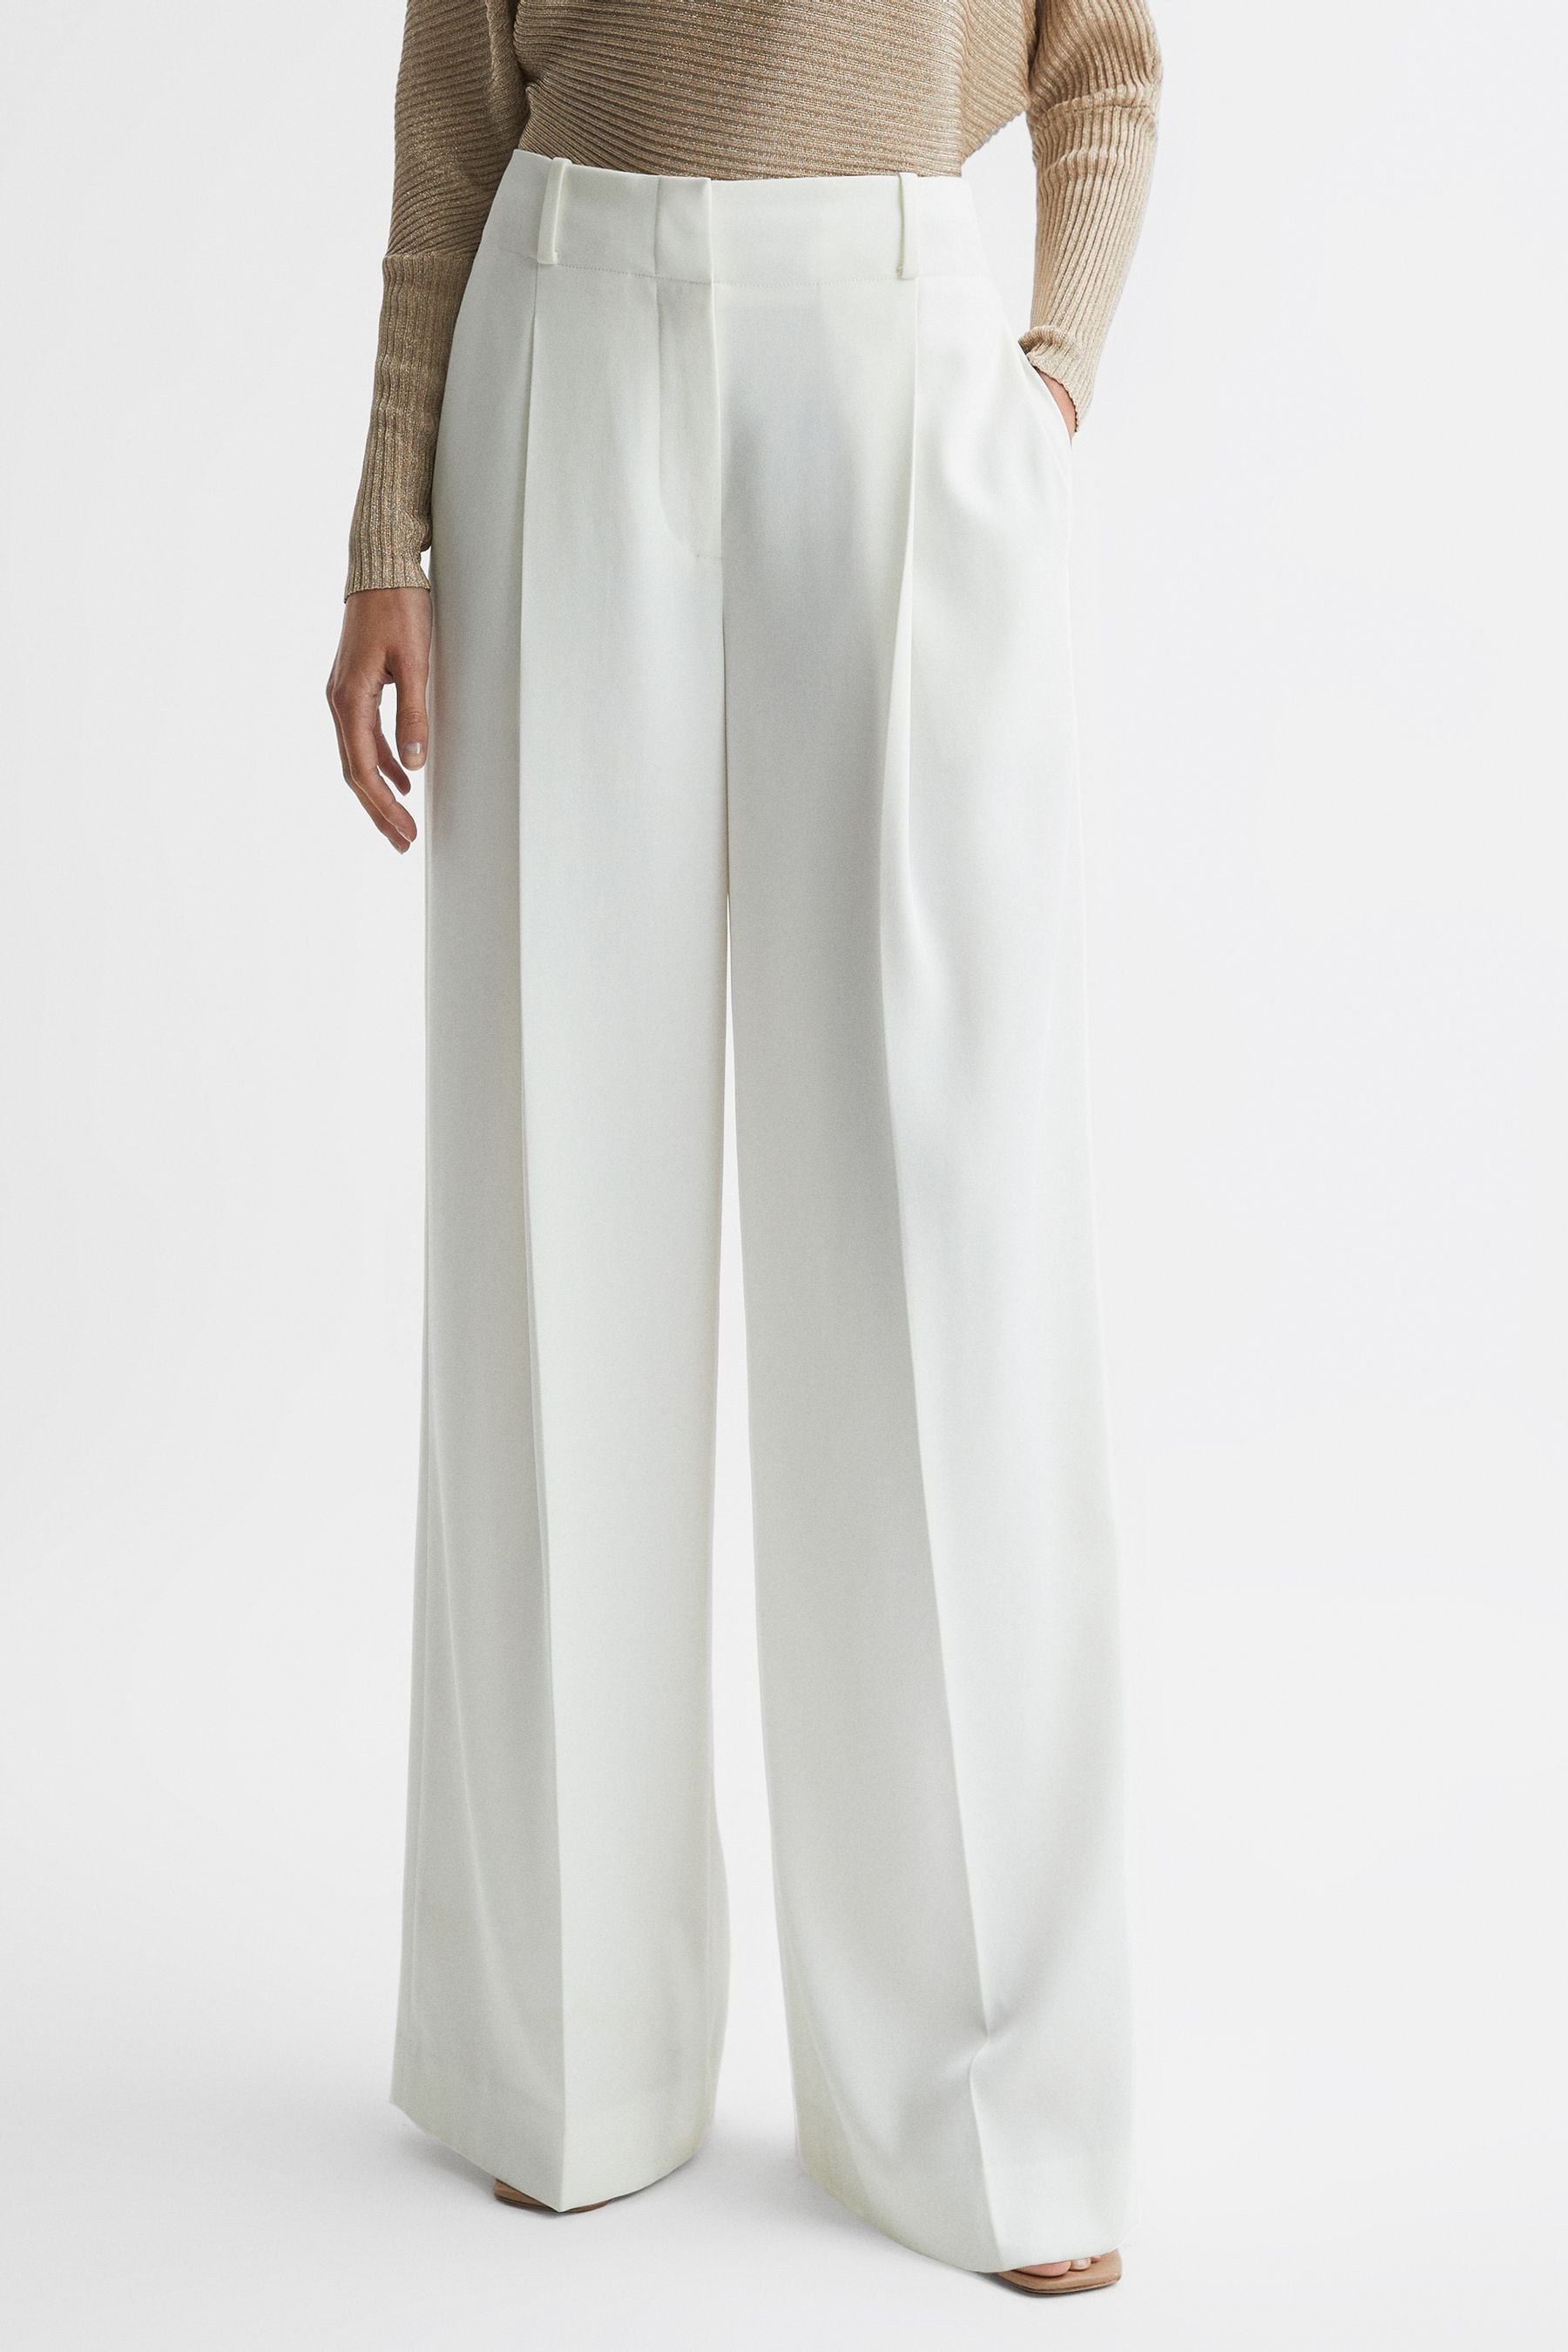 Reiss Lillie - White Mid Rise Wide Leg Trousers, Us 0